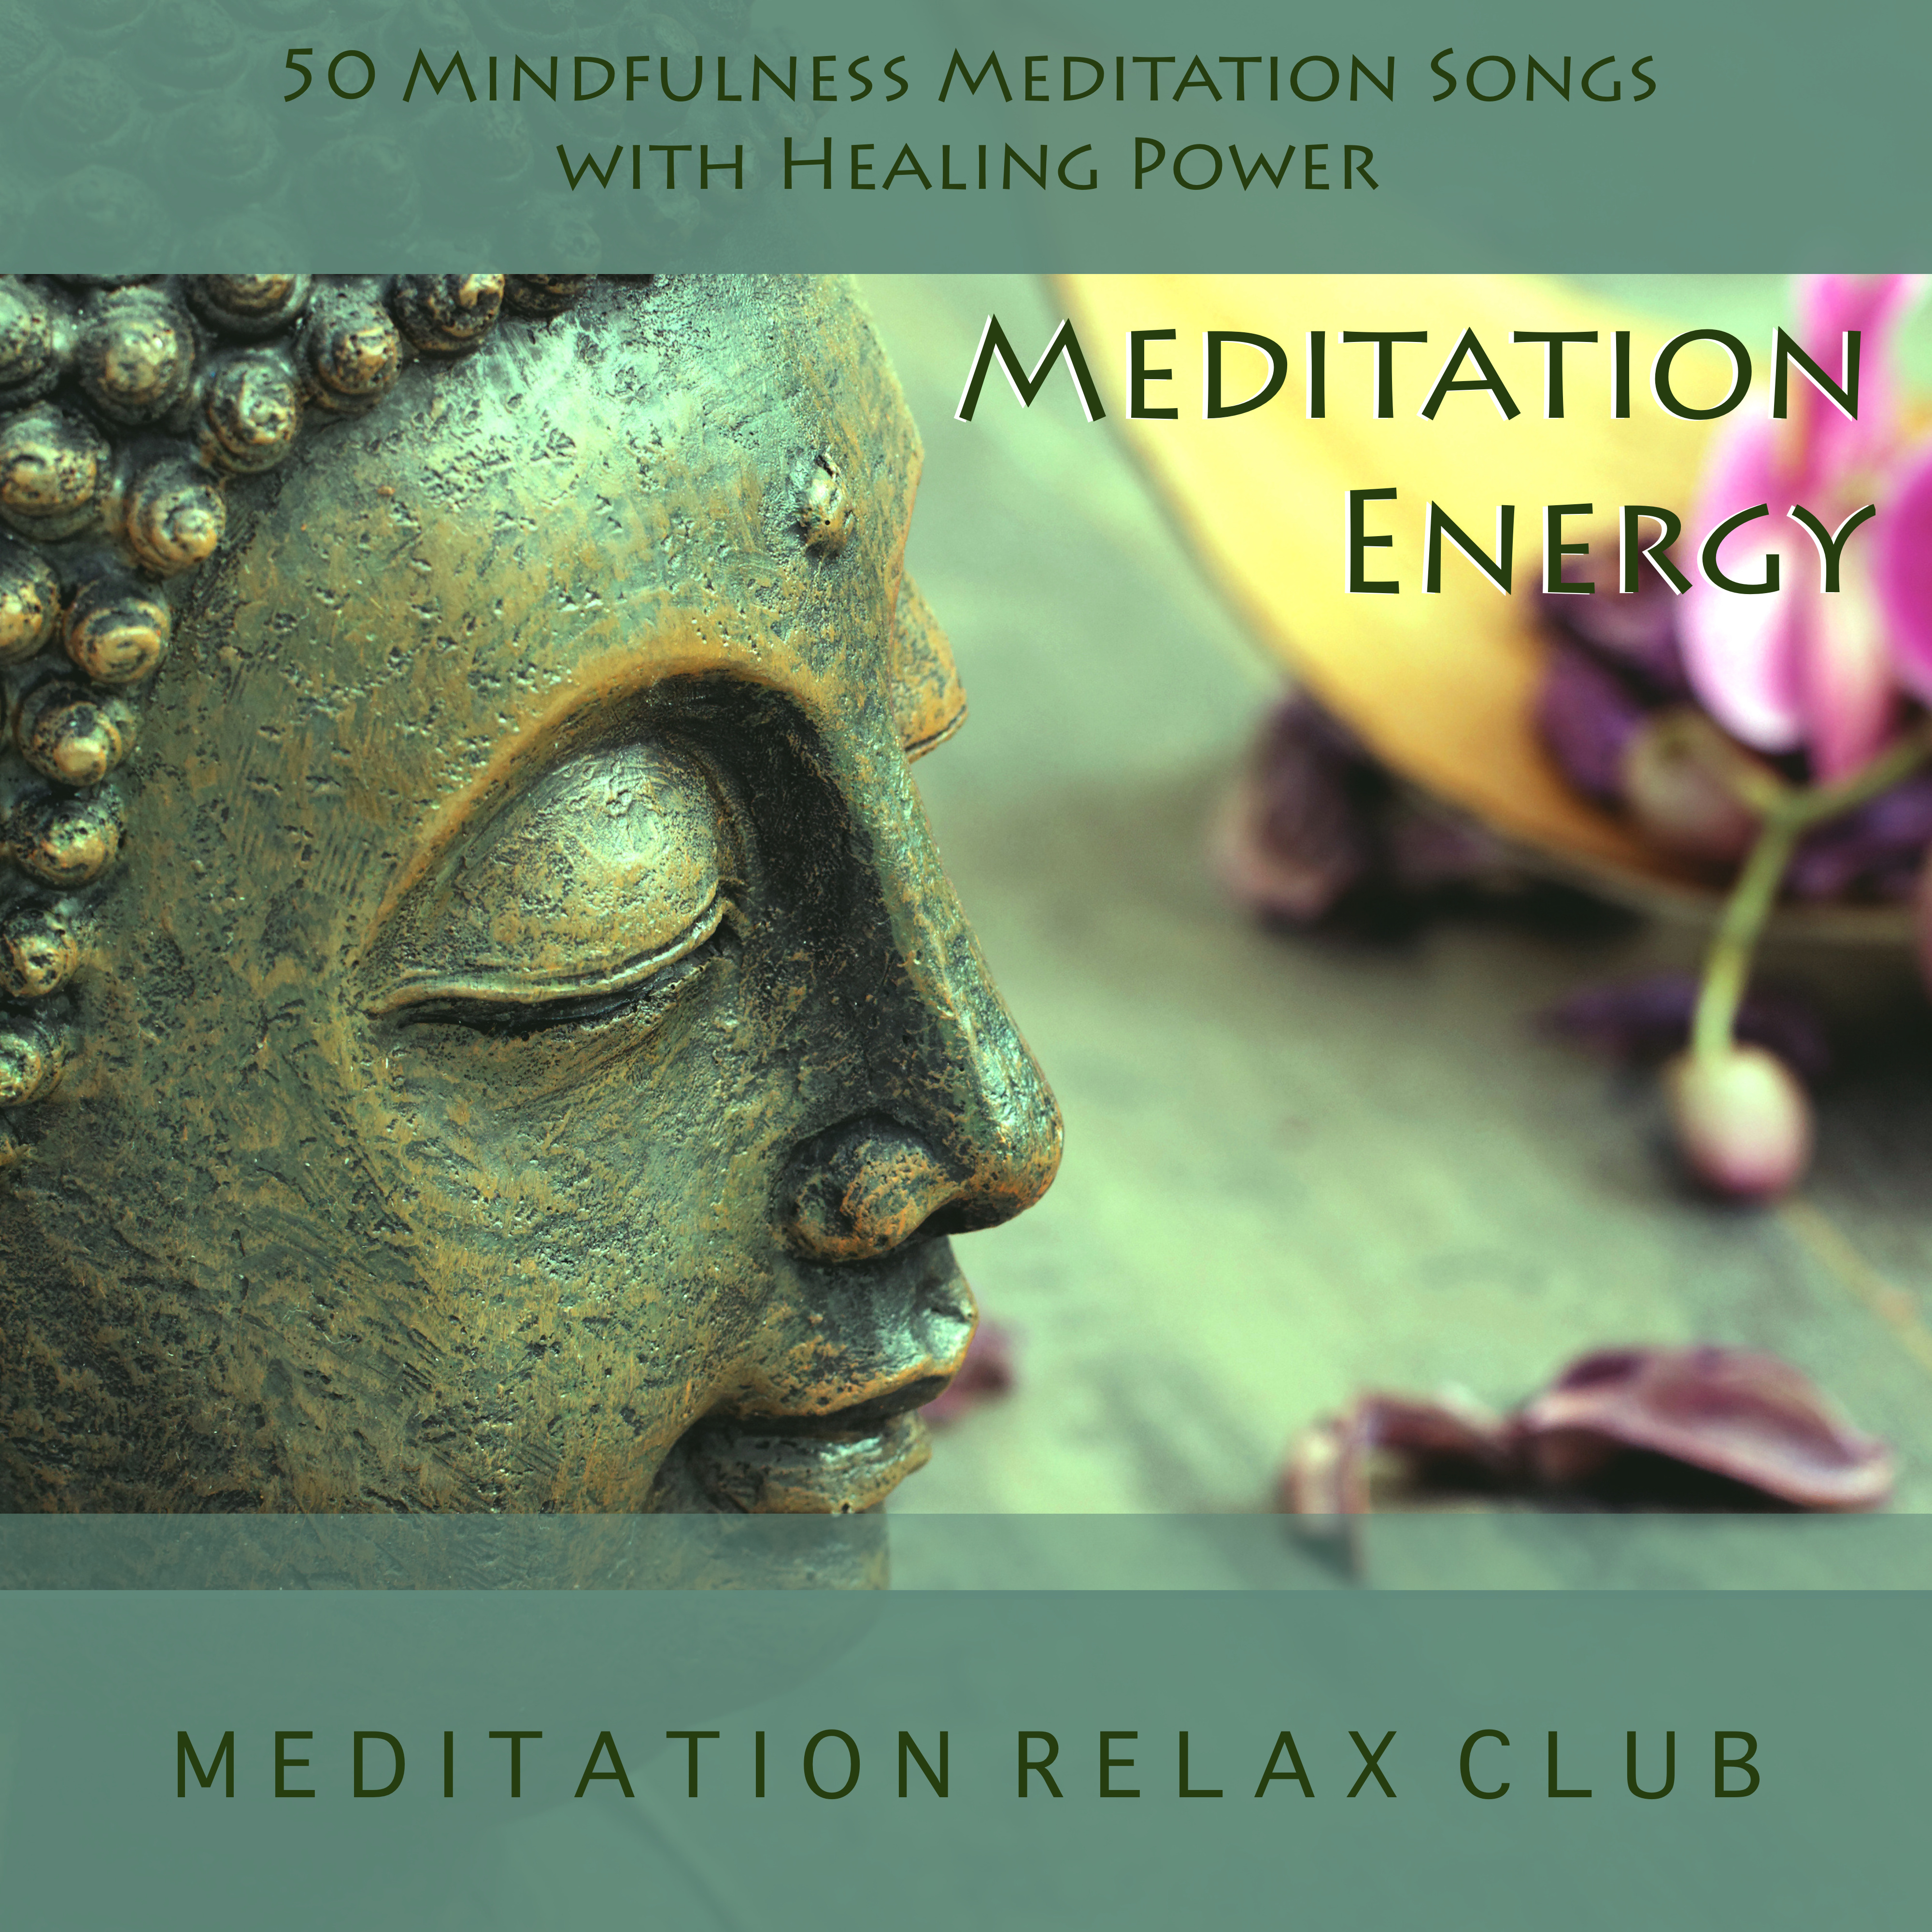 Meditation Energy - 50 Mindfulness Meditation Songs with Healing Power